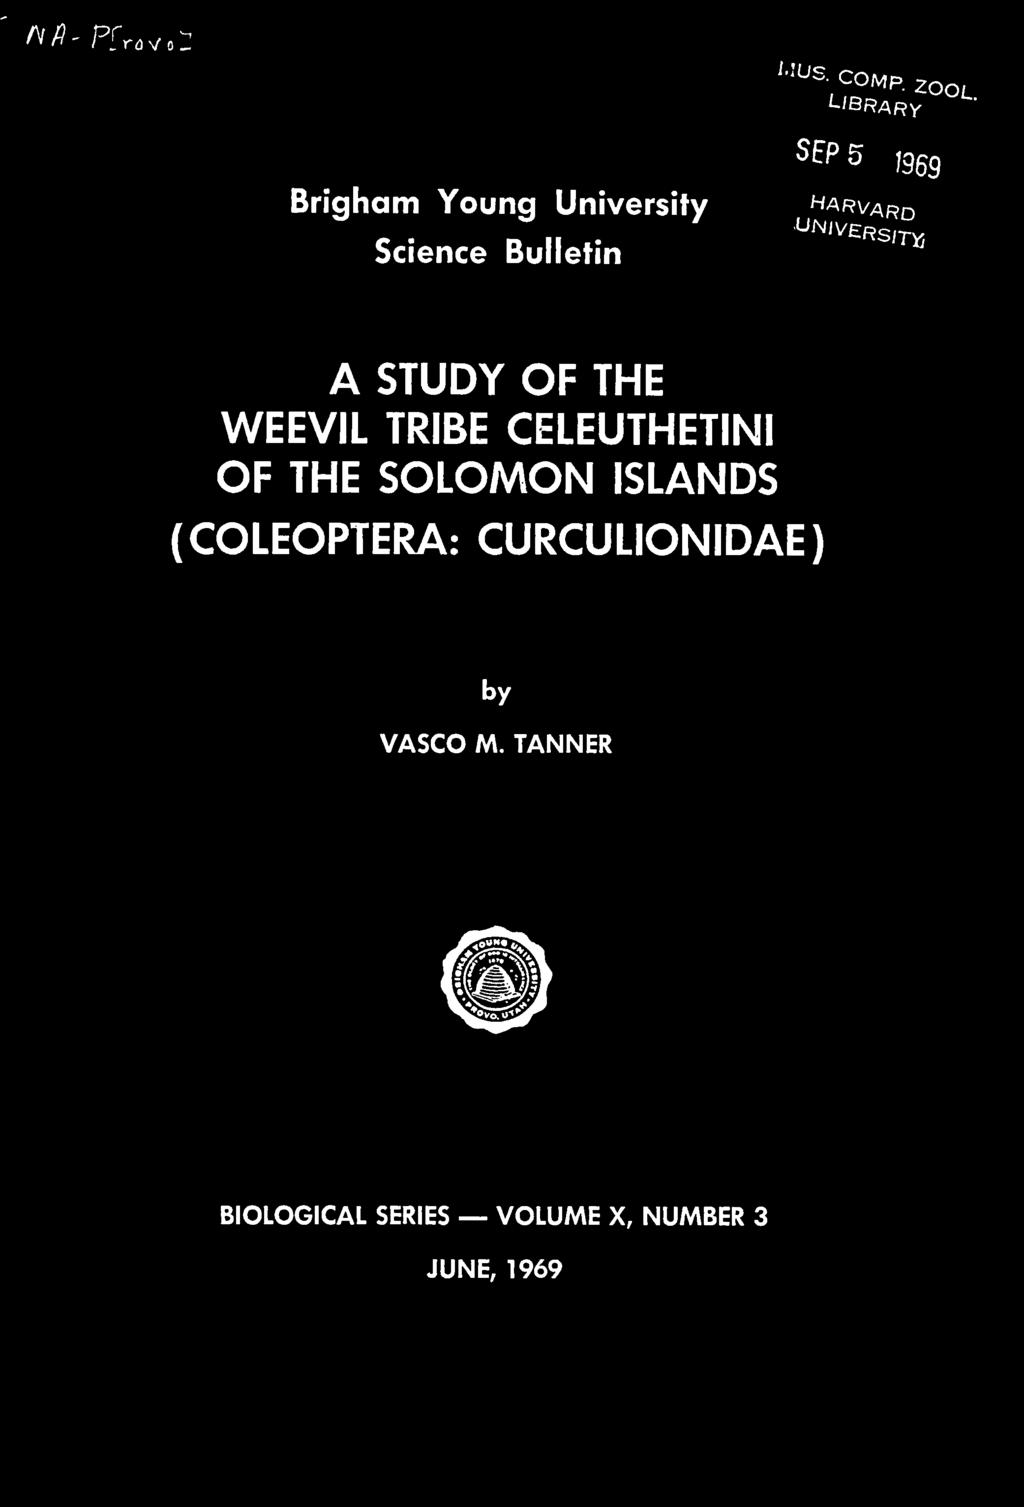 STUDY OF THE WEEVIL TRIBE CELEUTHETINI OF THE SOLOMON ISLANDS